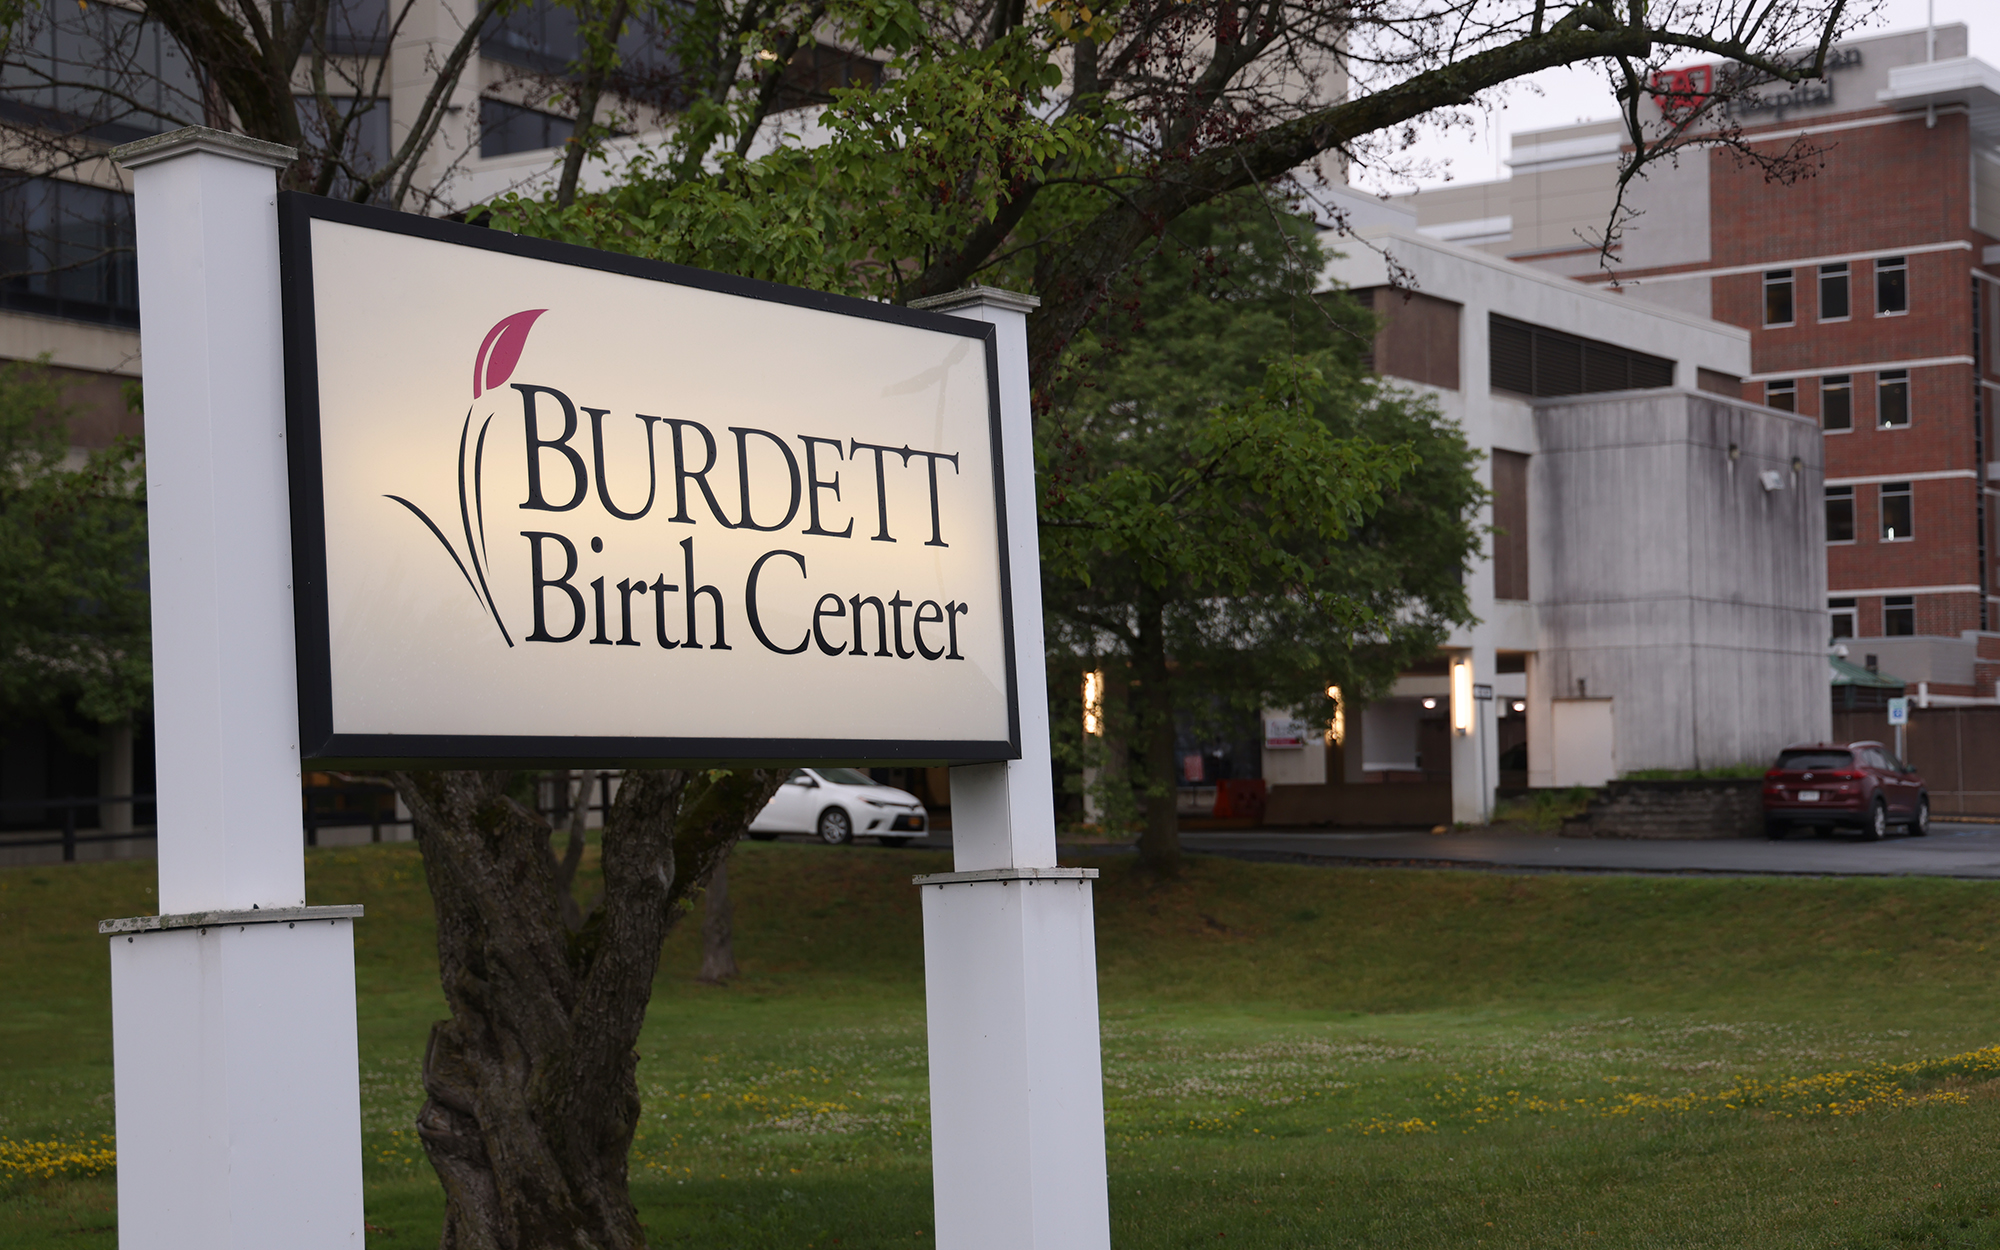 Burdett Birth Center is the only facility solely dedicated to labor and delivery in New York’s Rensselaer County. In June, St. Peter’s Health Partners, the Catholic health care system that owns the facility, announced its intention to close the birth center for financial reasons. (Photo by Morgan Casey/News21)